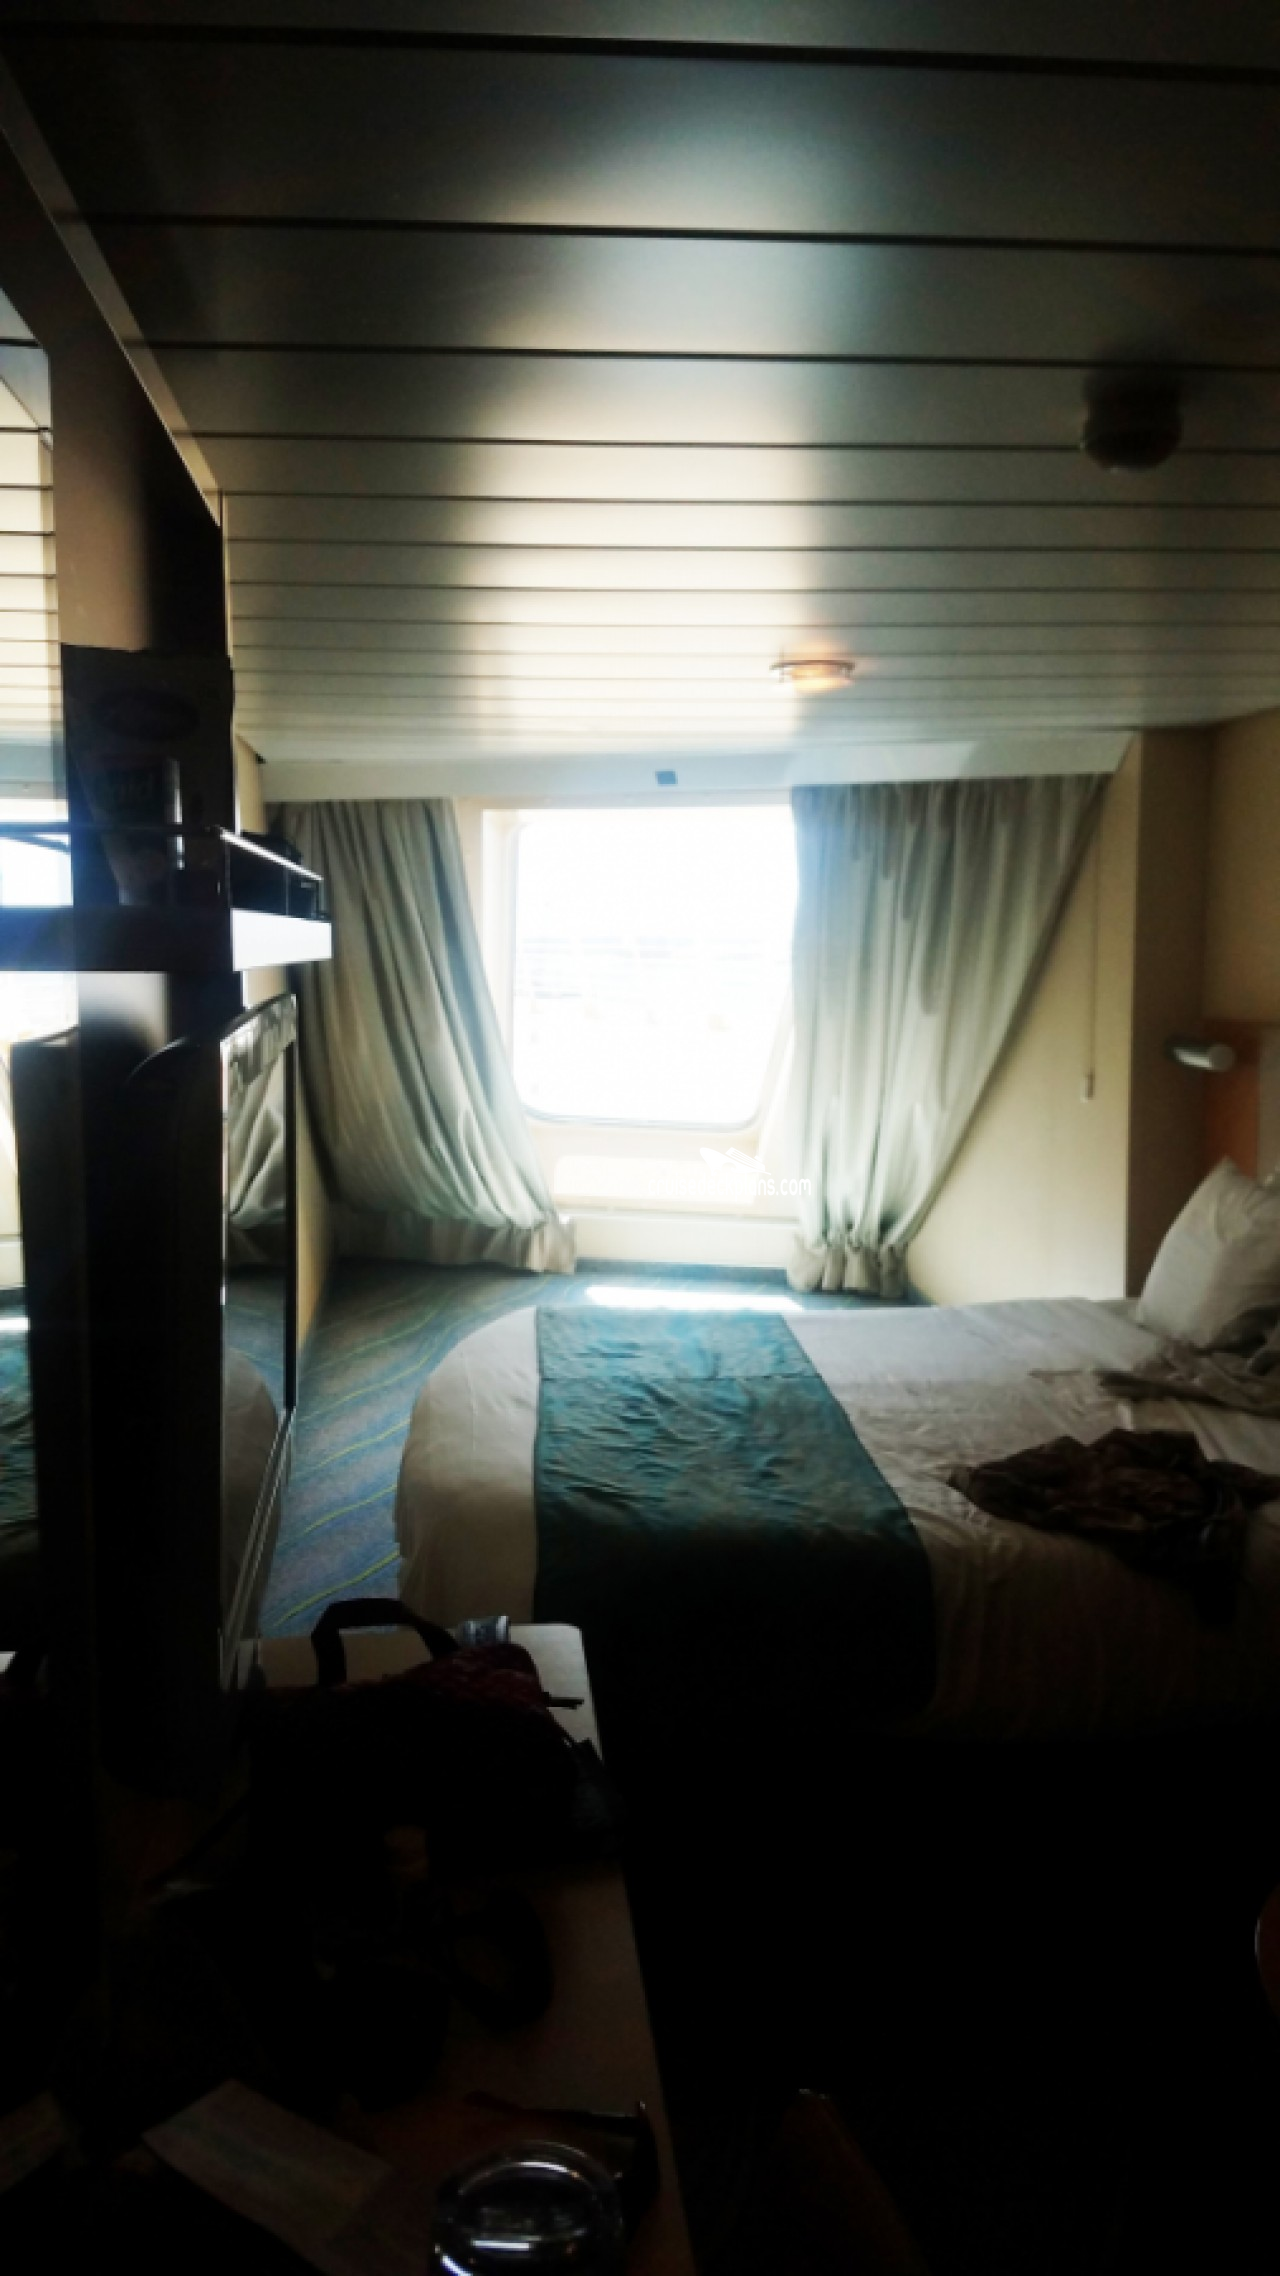 Oasis of the seas cabins